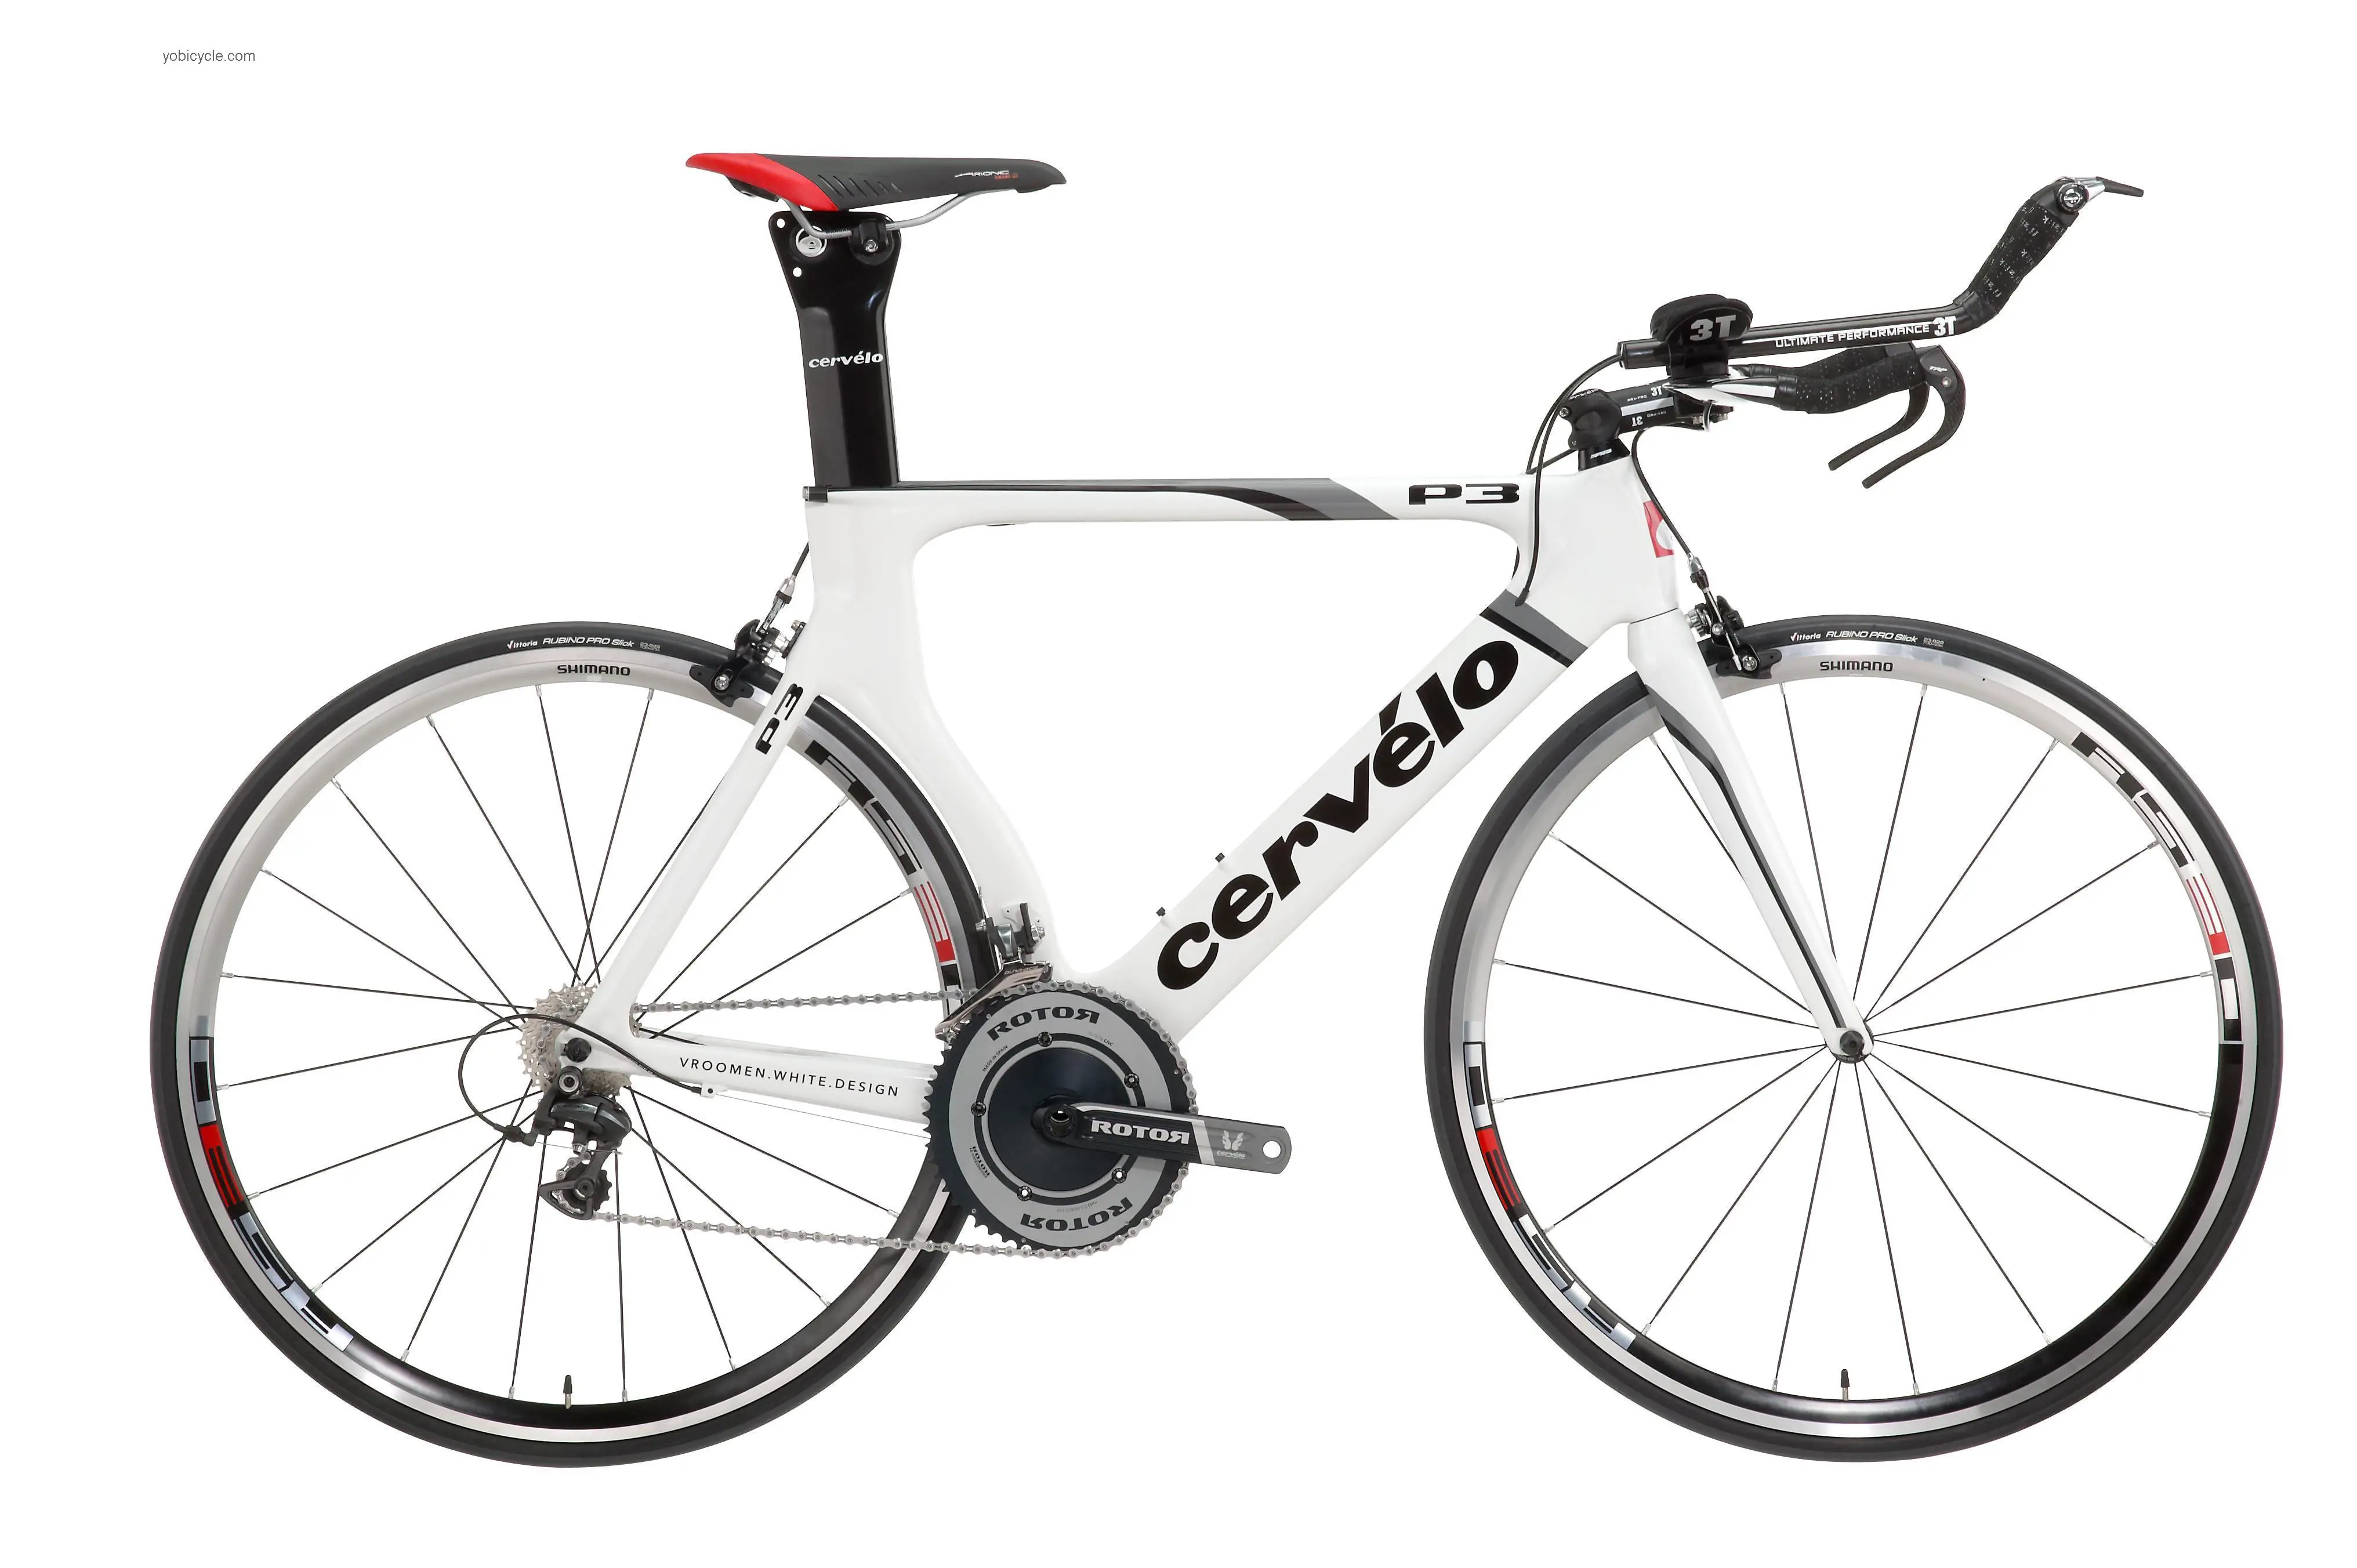 Cervelo P3 Dura-Ace competitors and comparison tool online specs and performance